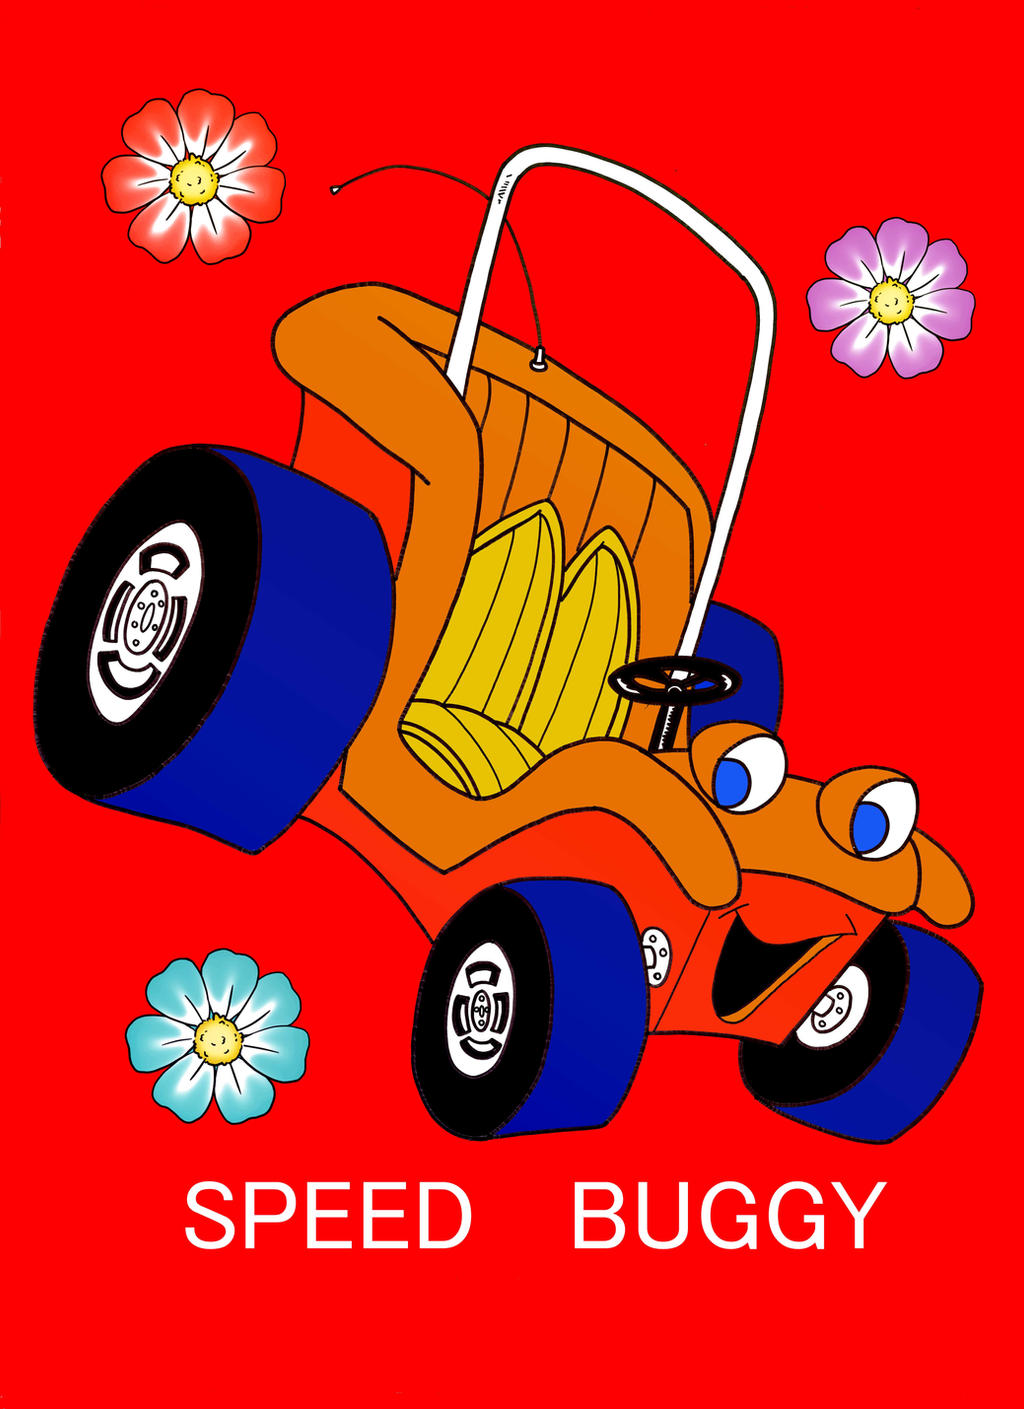 CLASSIC SPEED BUGGY by donandron on DeviantArt